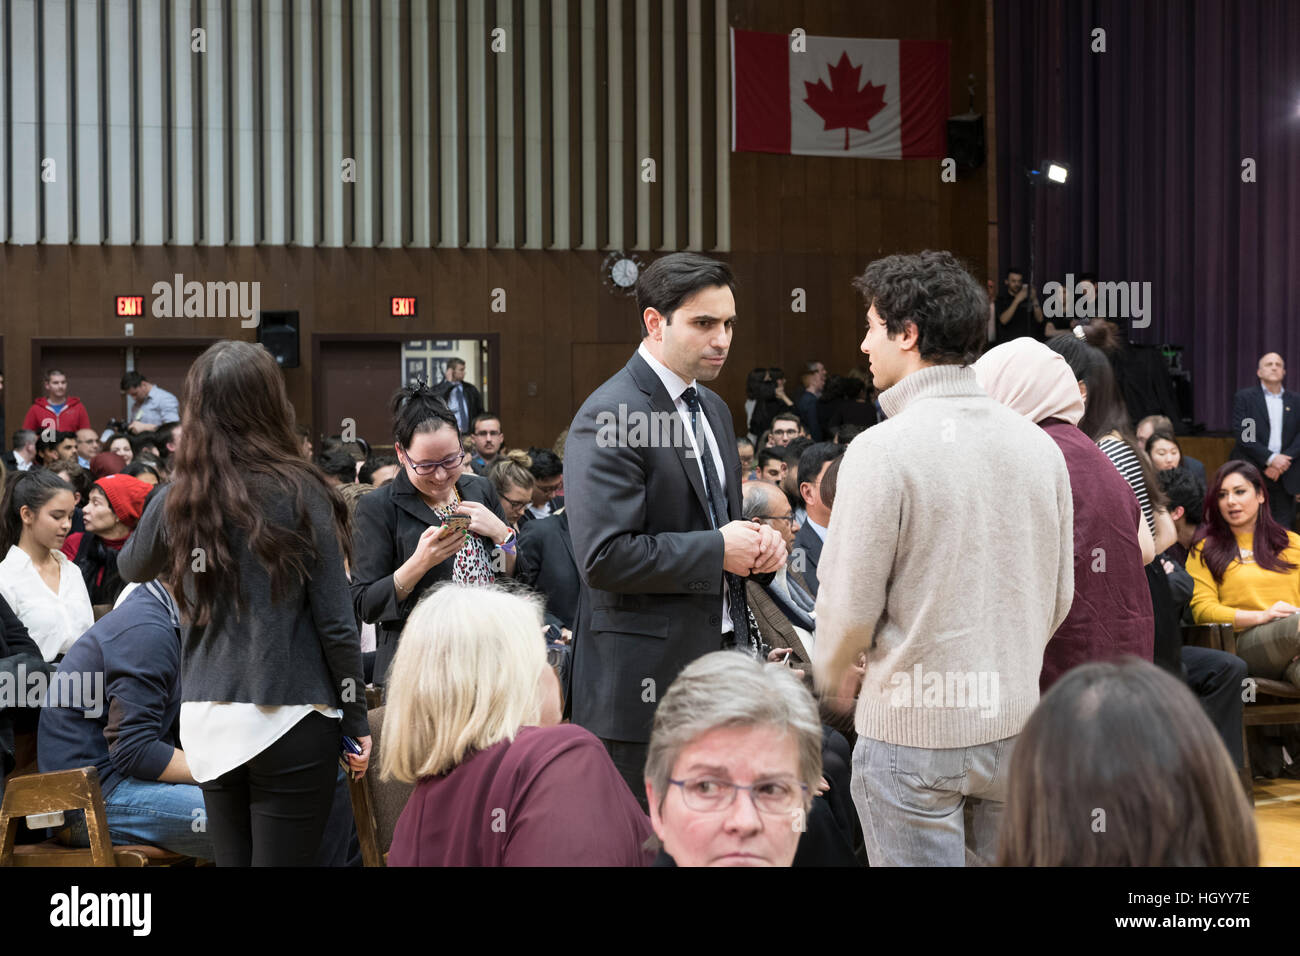 London, Ontario, Canada, 13th January, 2017. Peter Fragiskatos, Member of Parliament (MP) London North Centre, talks with members of the audience before the start of a town hall Q&A with the Prime Minister of Canada, held in London, Ontario. London was one of the Prime Minister's stops as part of his cross-country tour. Credit: Rubens Alarcon/Alamy Live News Stock Photo